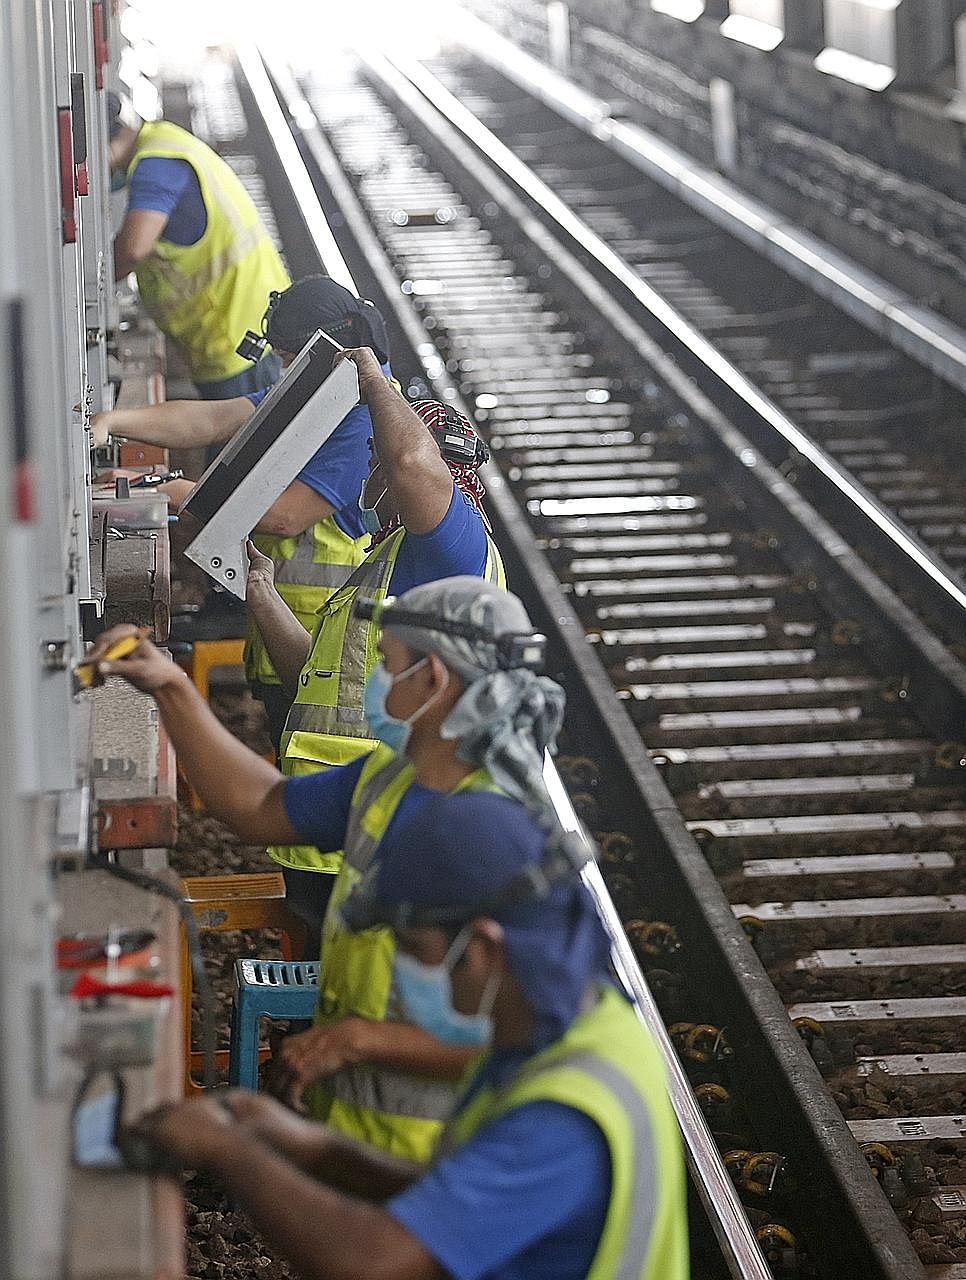 Maintenance work being done at Jurong East station yesterday. Overall, the first weekend of planned service disruptions went smoothly although many commuters were caught off guard.